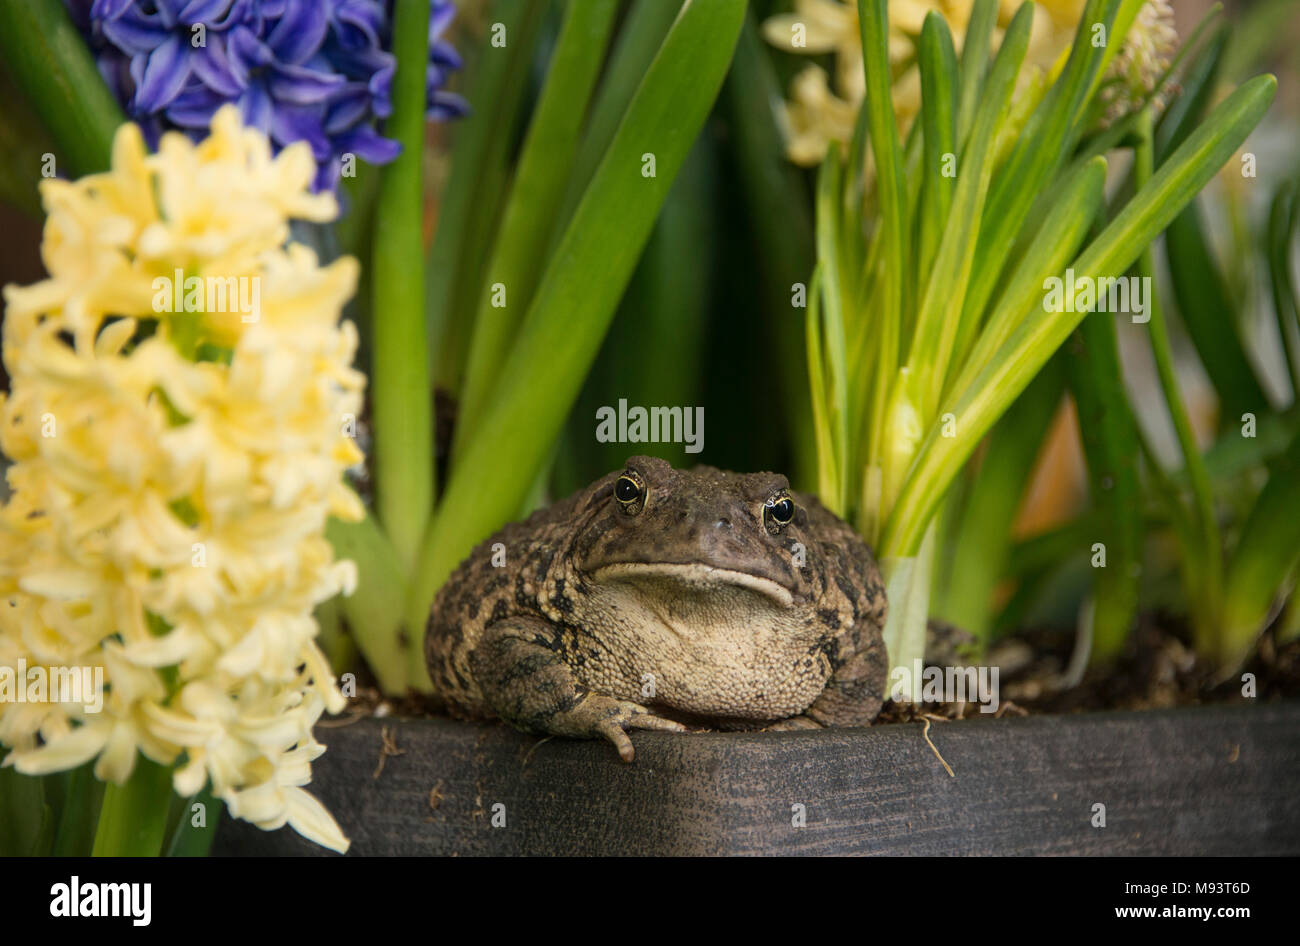 Toad frog with jewel-like golden eyes burrows in among spring blooming hyacinth and daffodil flowers Stock Photo